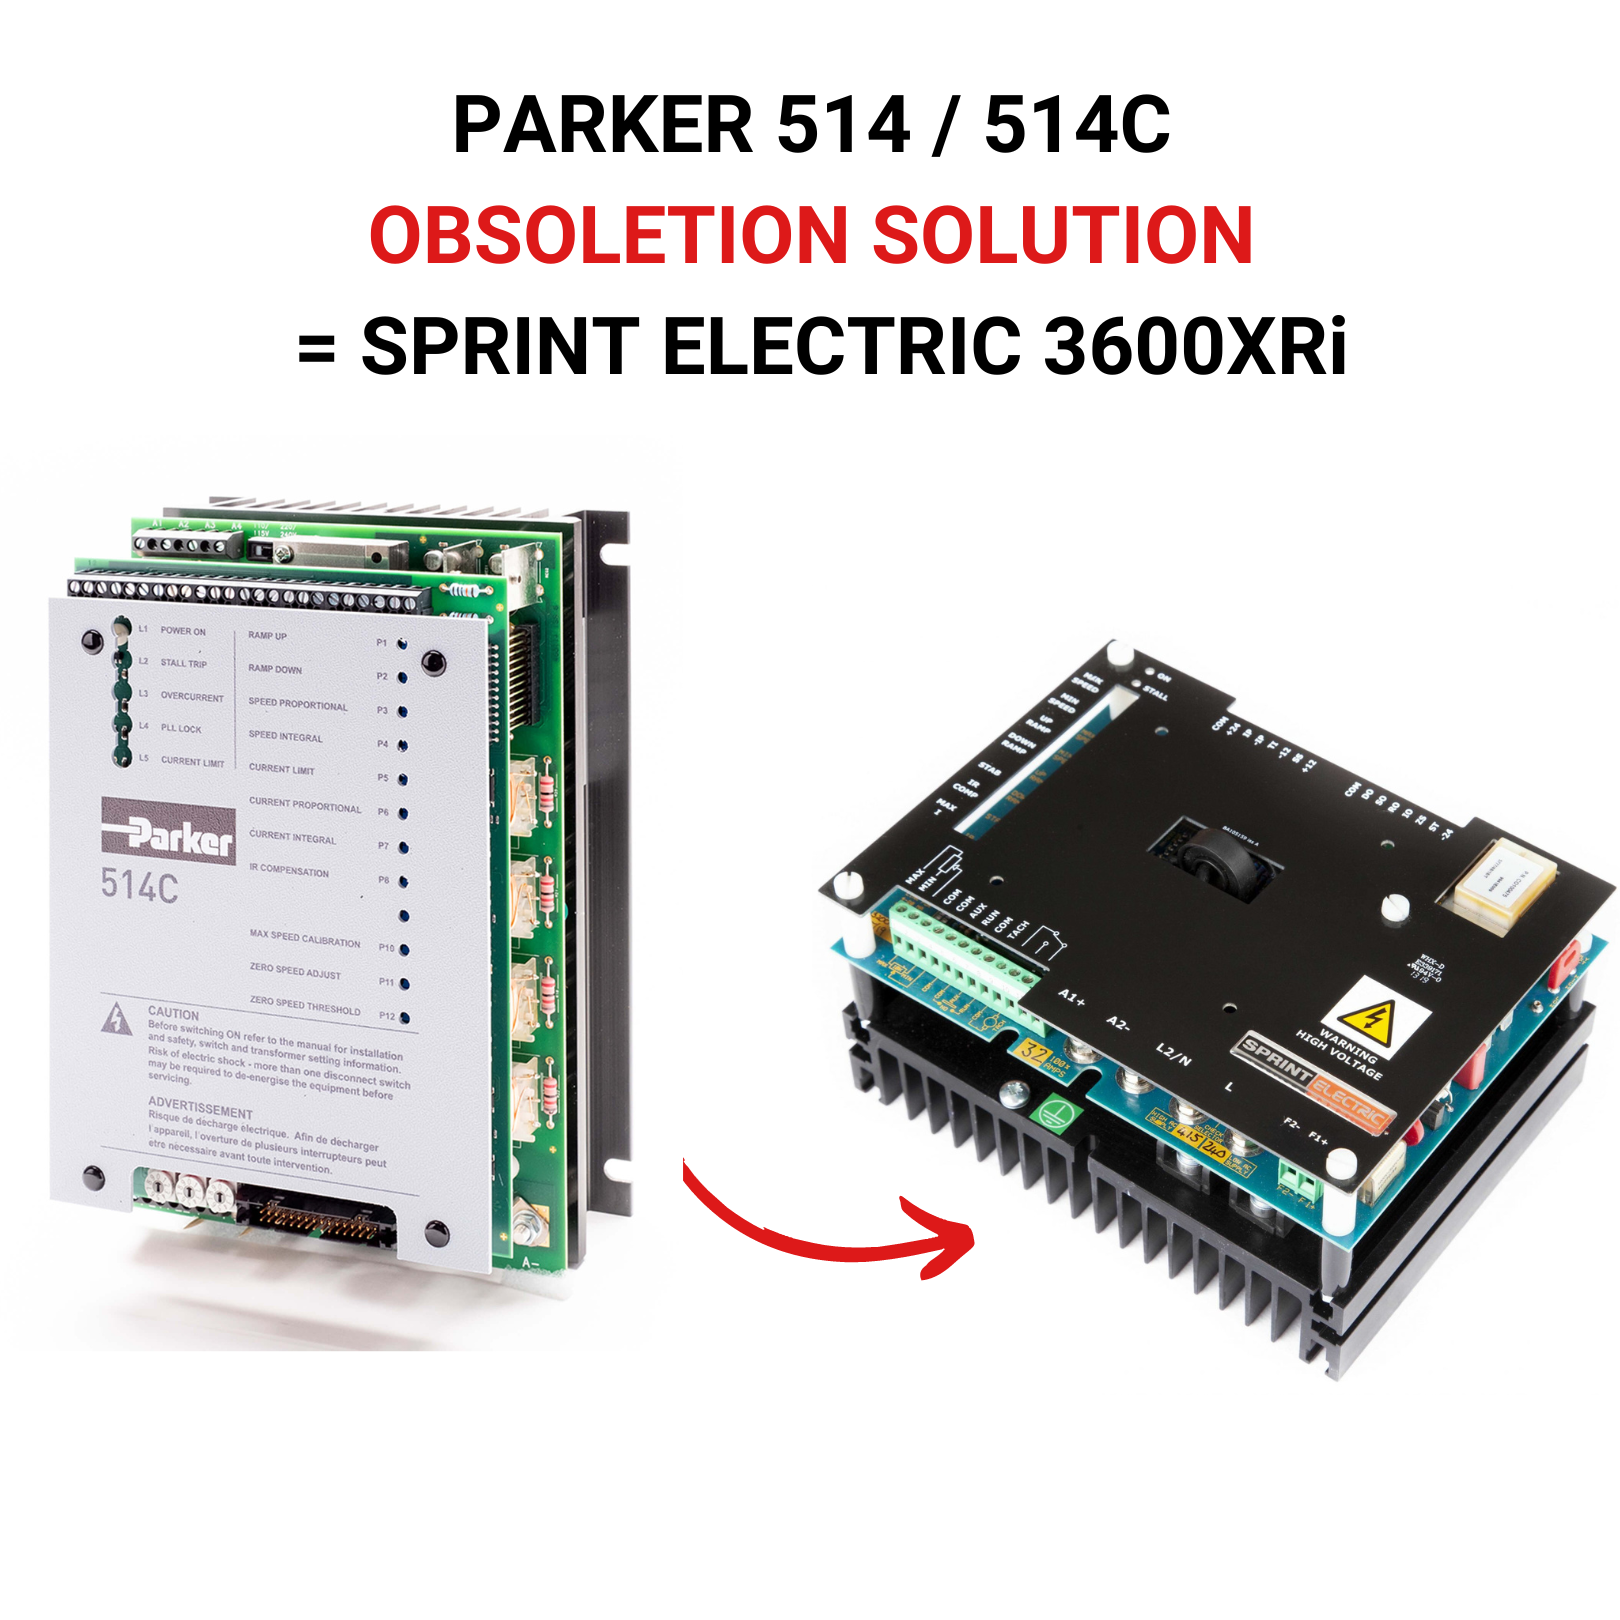 Parker 514 obsoletion solution is Sprint Electric 3600XRi